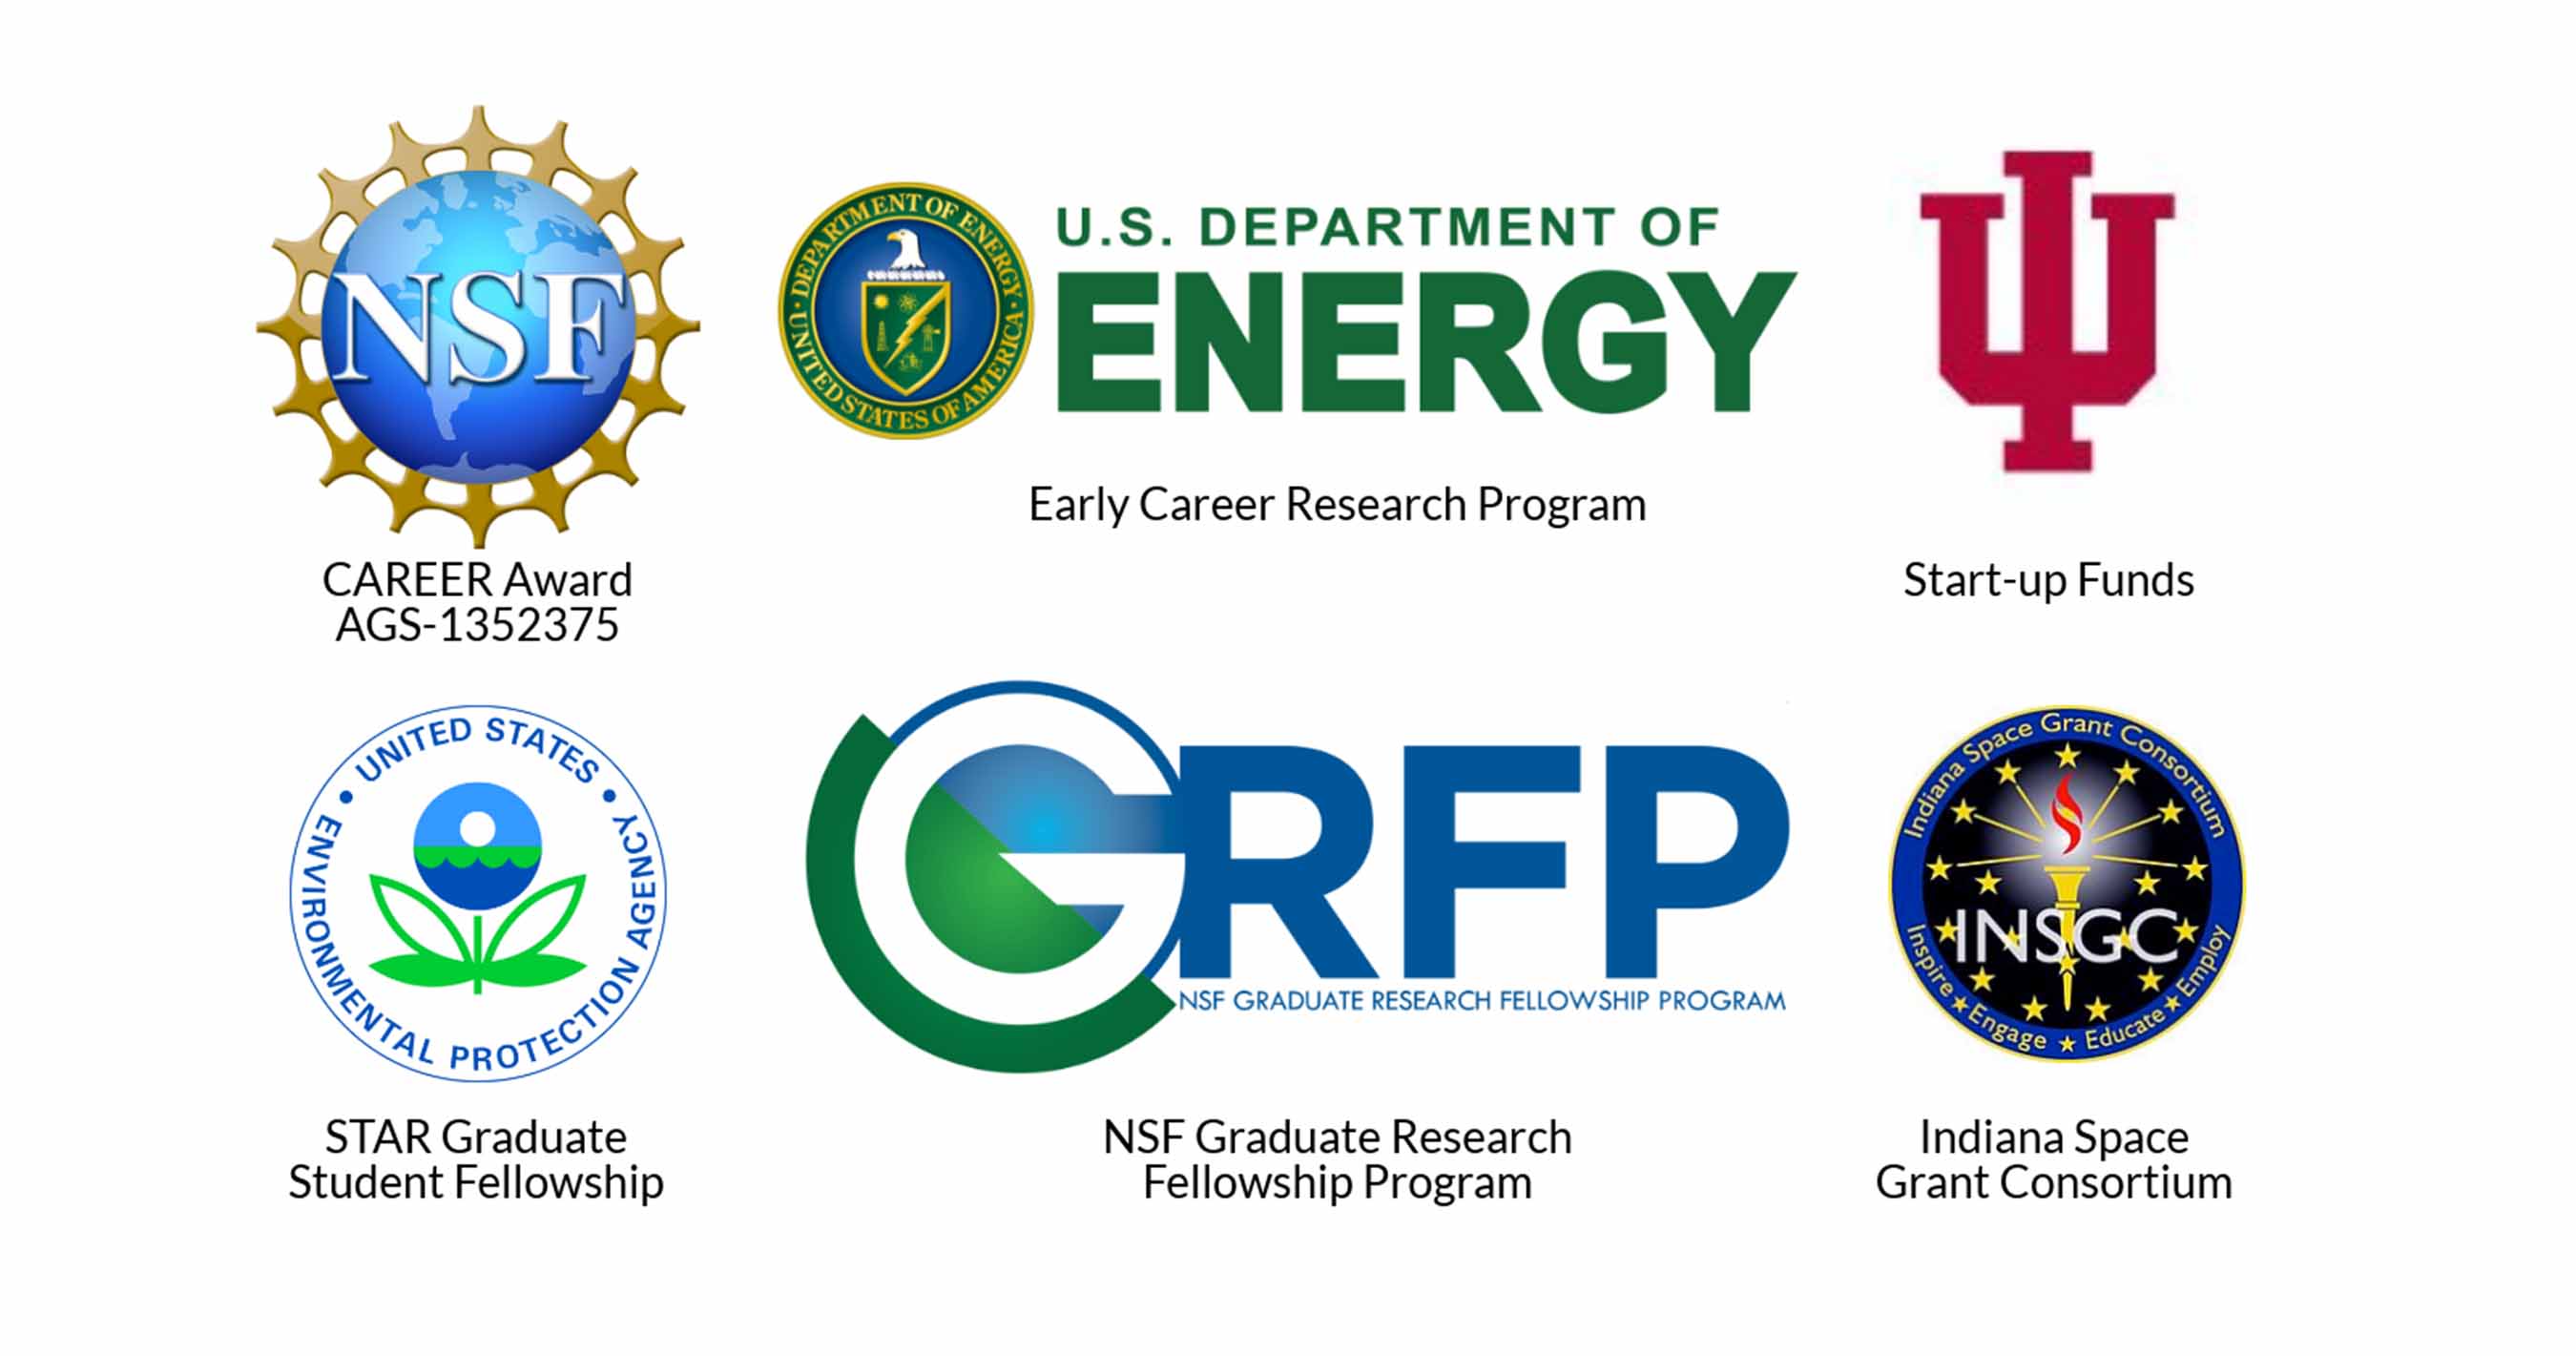 NSF CAREER Award AGS-1352375; U.S. Department of Energy Early Career Research Program; IU Start-up Funds; U.S. Environmental Protection Agency STAR Graduate Student Fellowship; NSF Graduate Research Fellowship Program; Indiana Space Grant Consortium